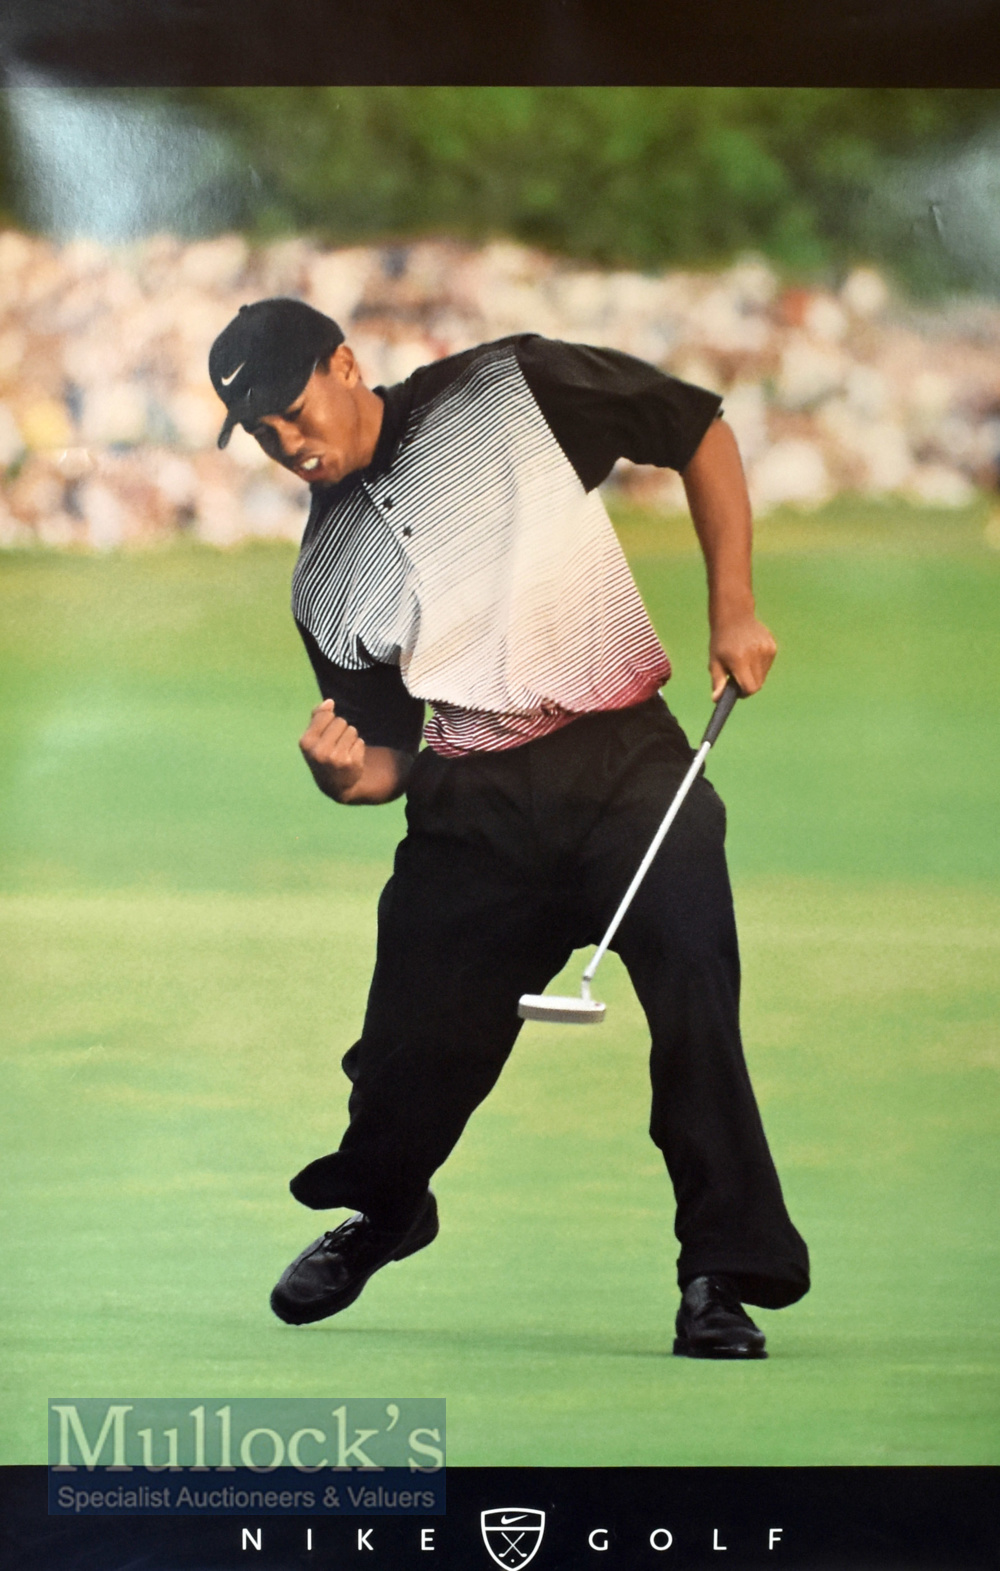 2x Tiger Woods Nike Golf original colour posters 1x entitled Driven with no other details, the other - Image 2 of 2